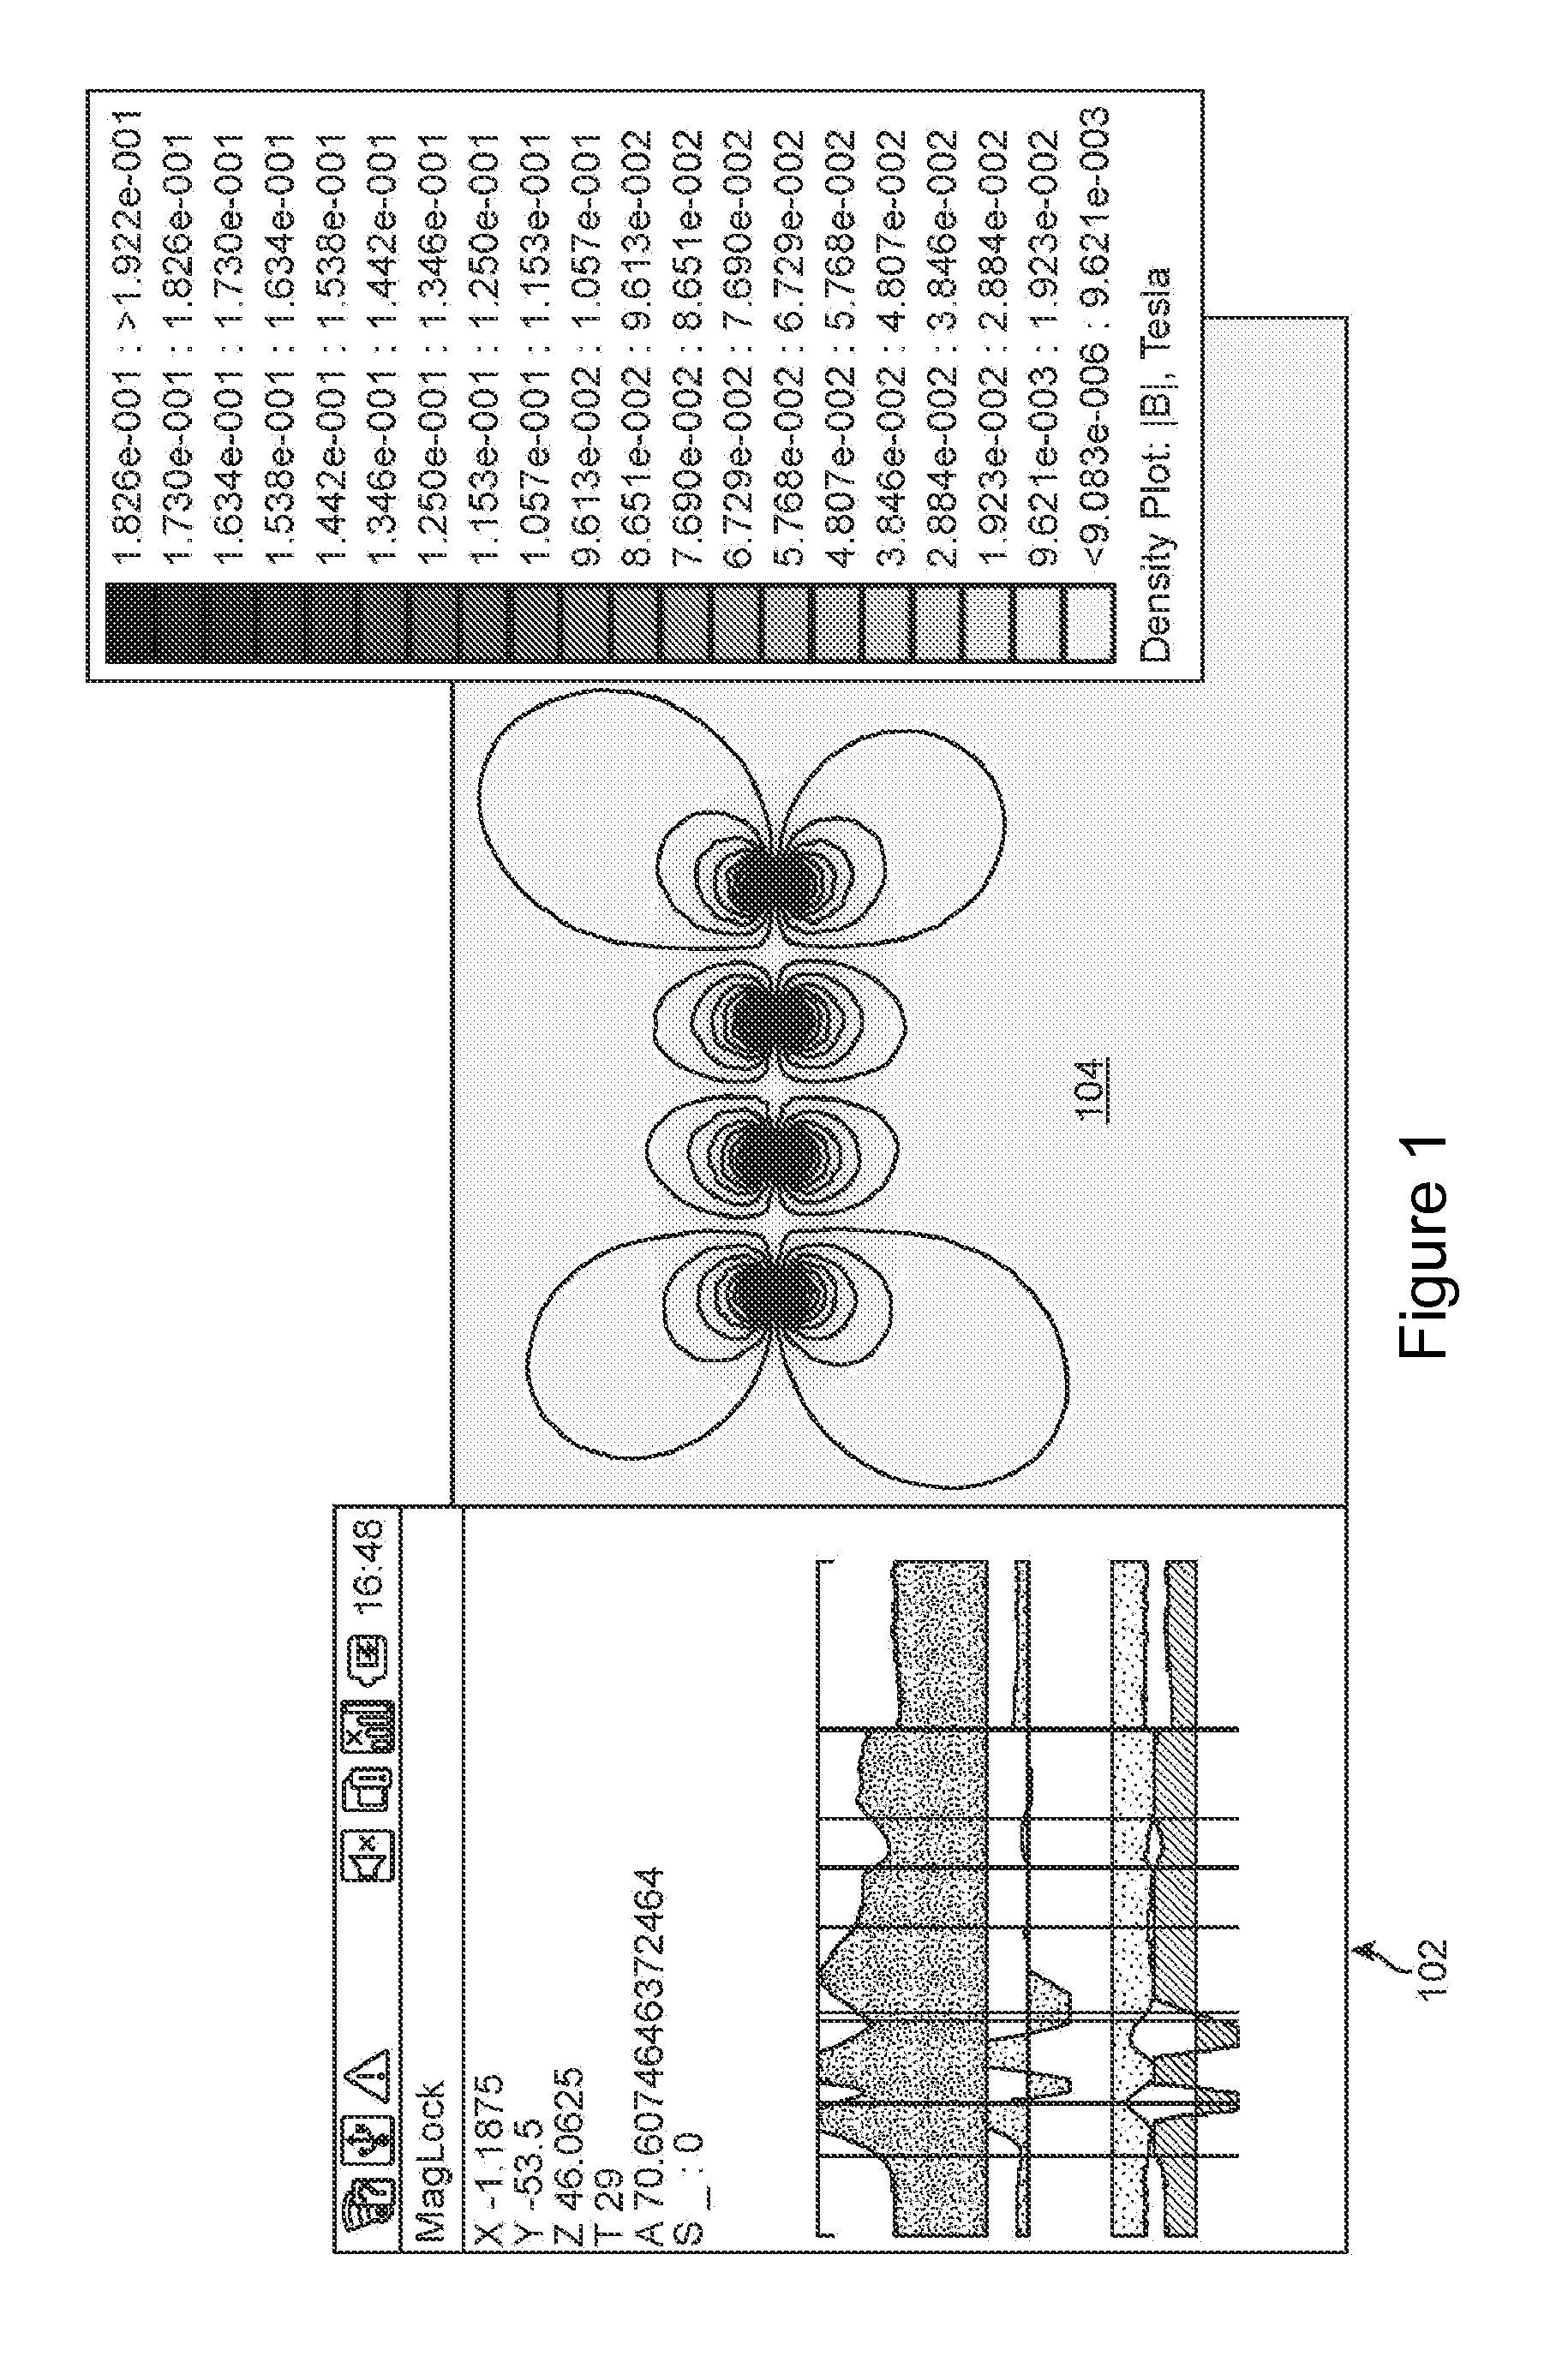 Method and System for Communication Between Devices